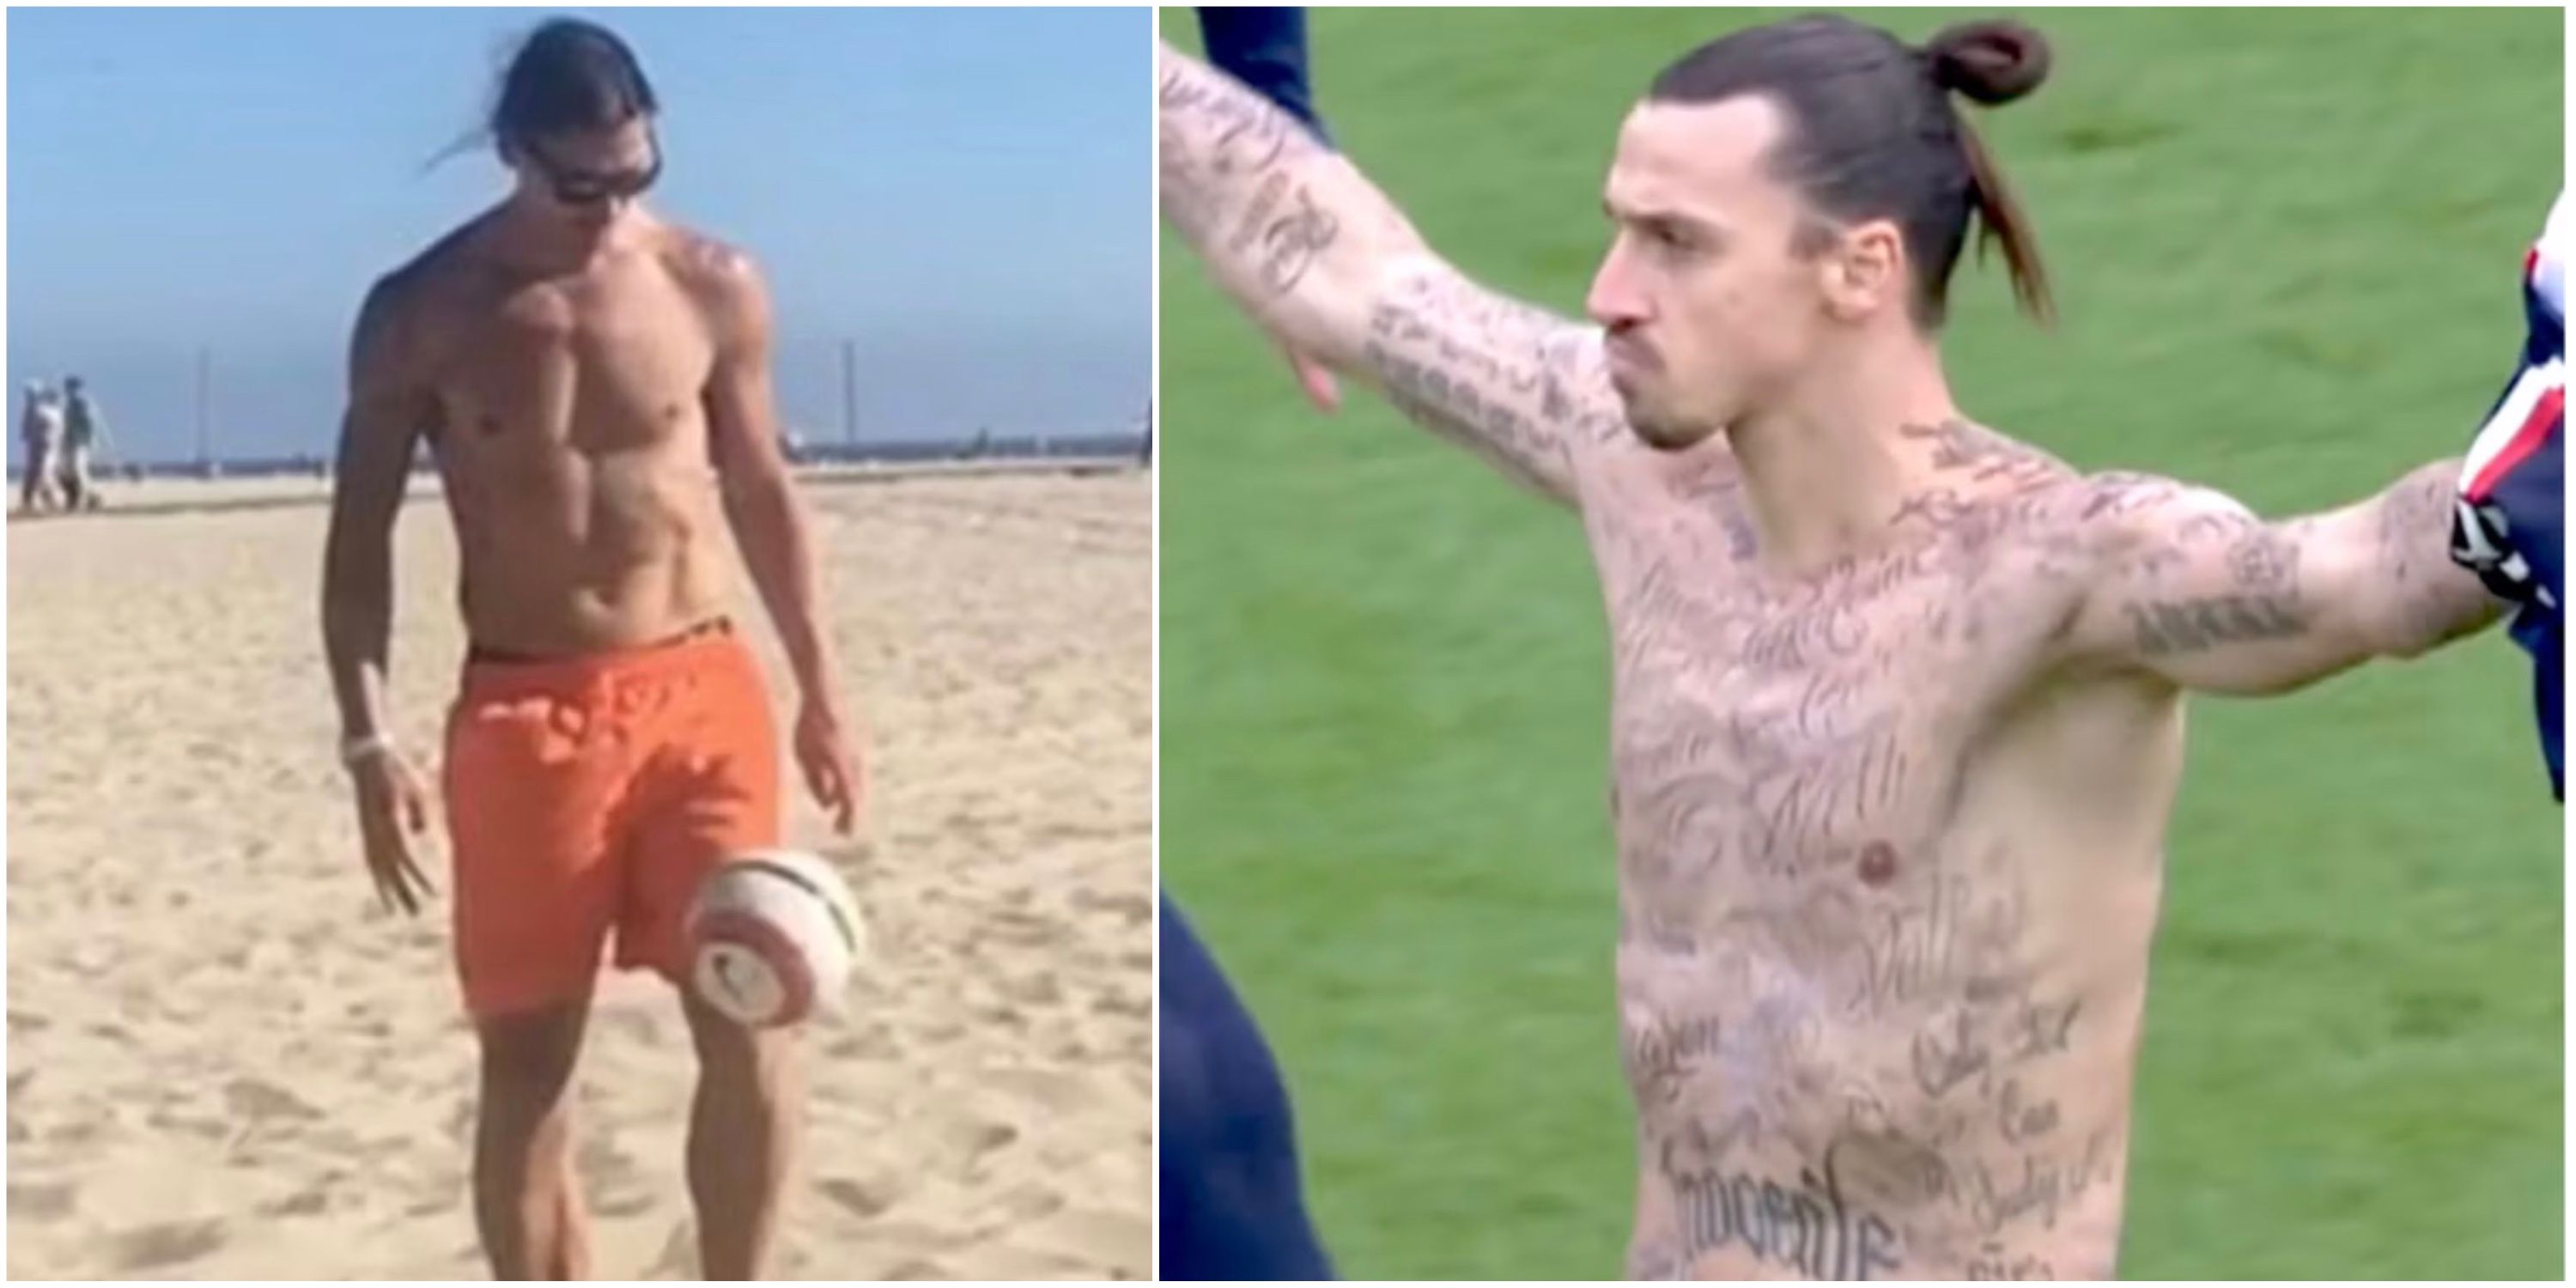 Football Epic News - Zlatan Ibrahimovic I've long told Memphis Depay to  erase off his tattoo because thats blasphemy! He is provoking me! There is  only 1 lion in this world, Depay